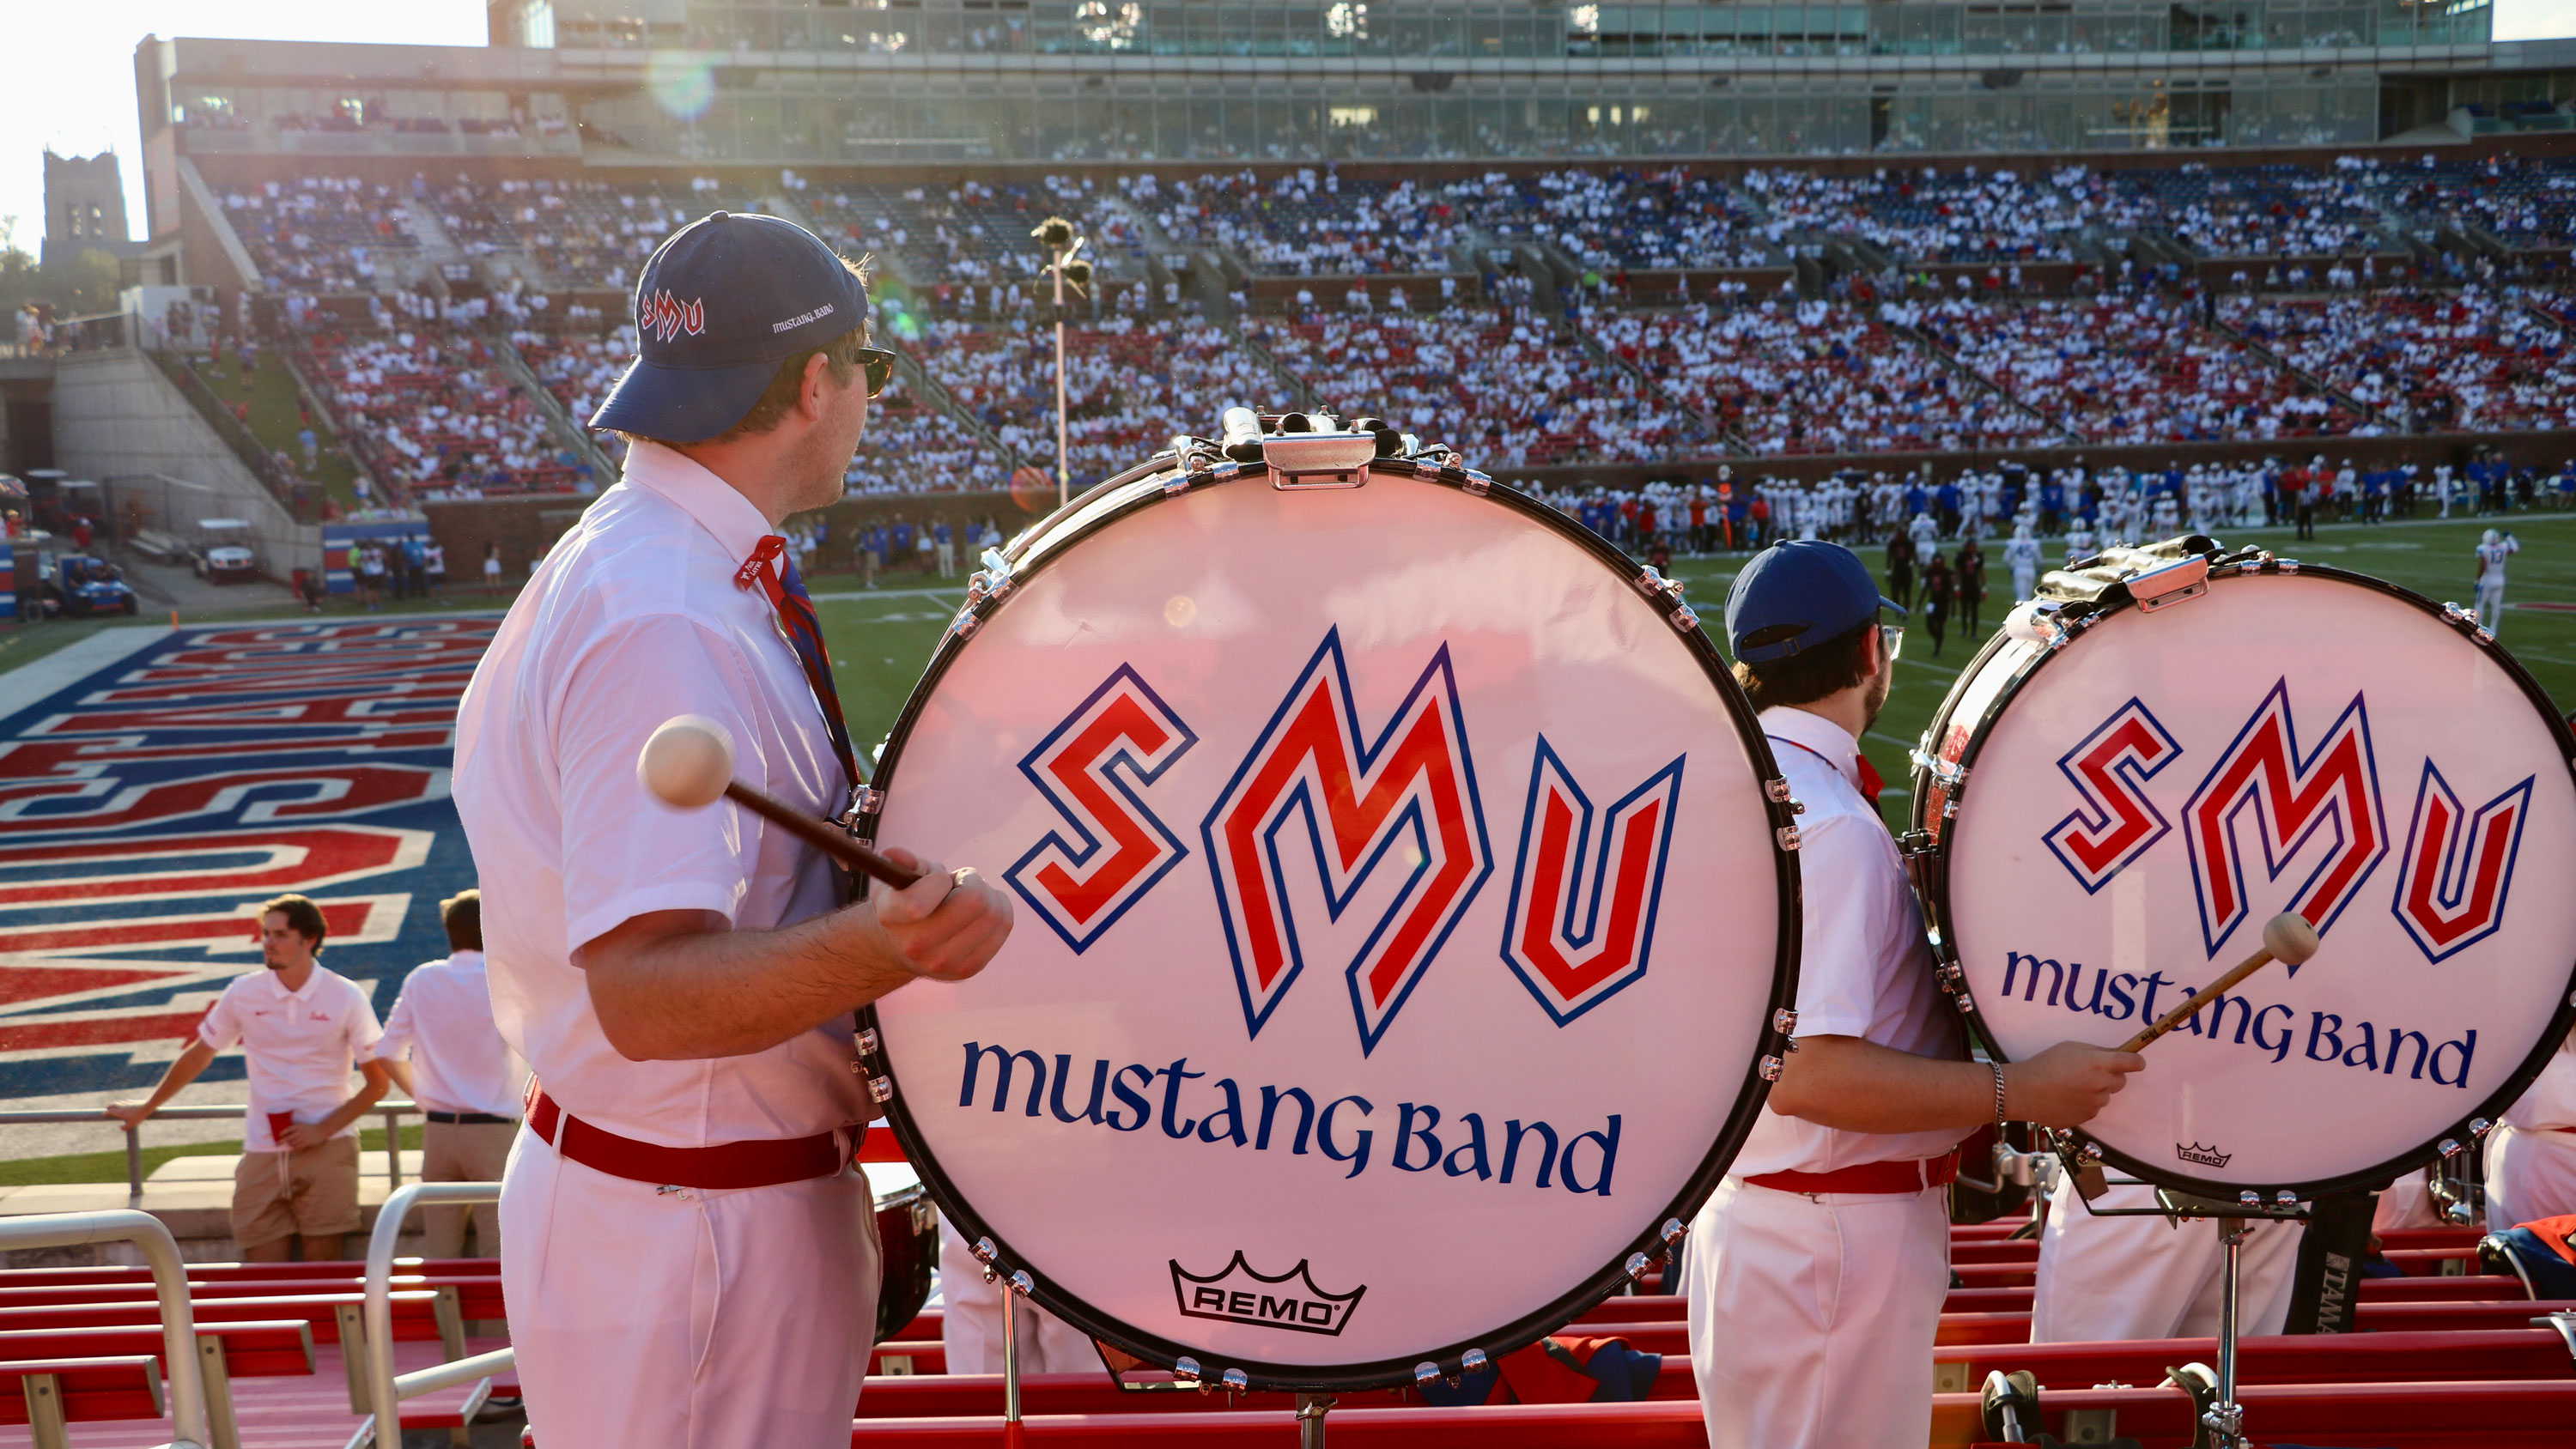 SMU Mustang Band drums with band logo in stands at football game